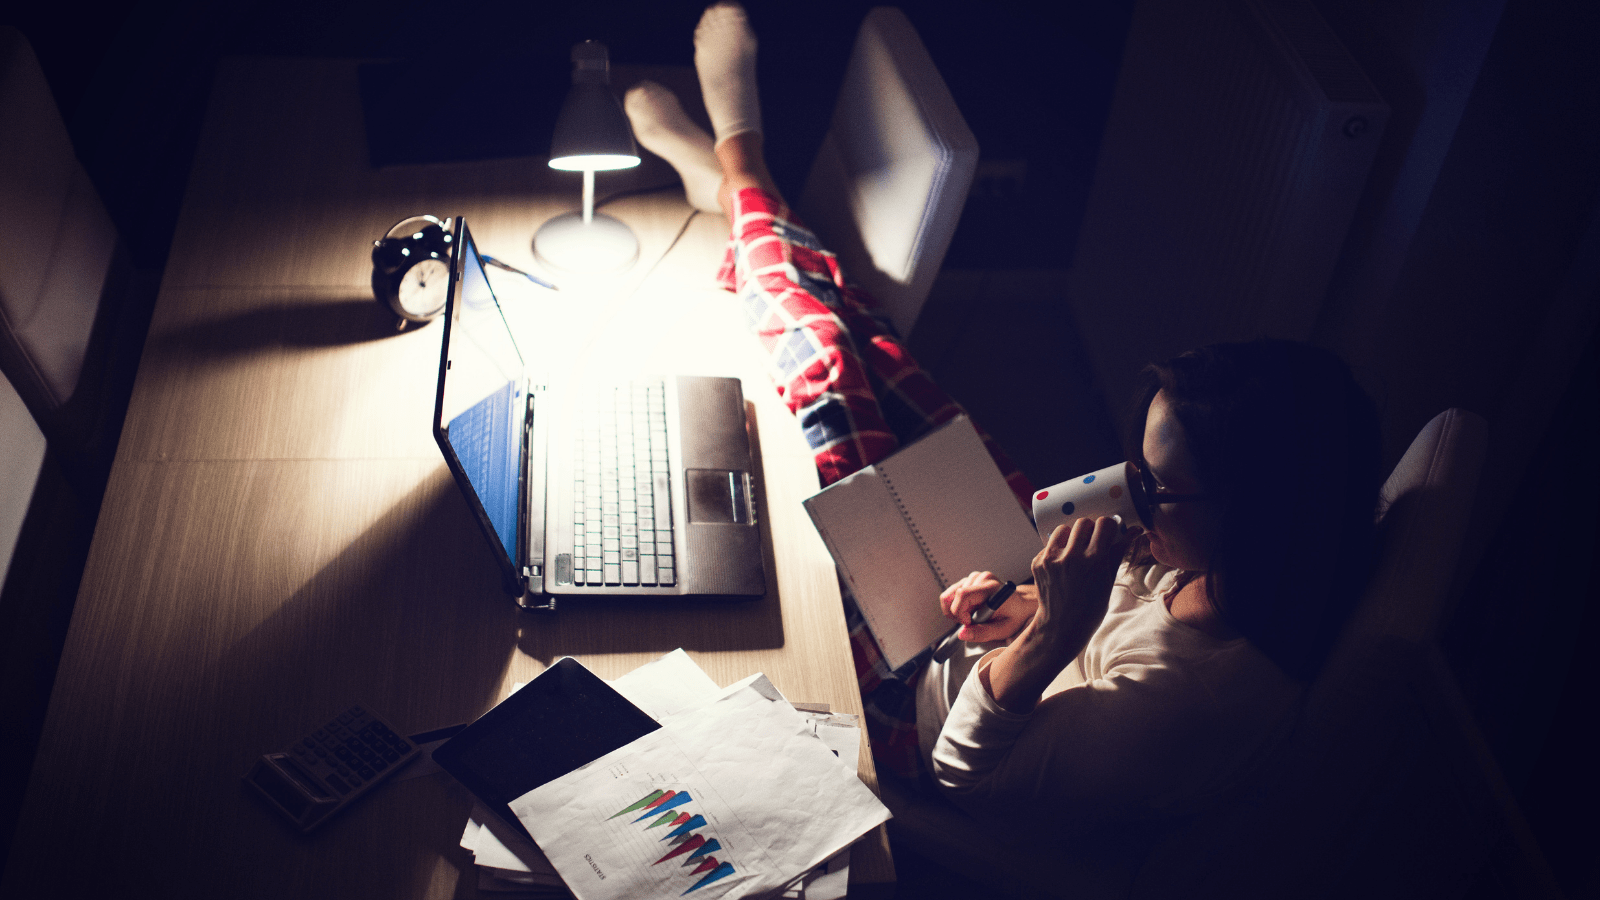 too much homework can cause teens to stay up late